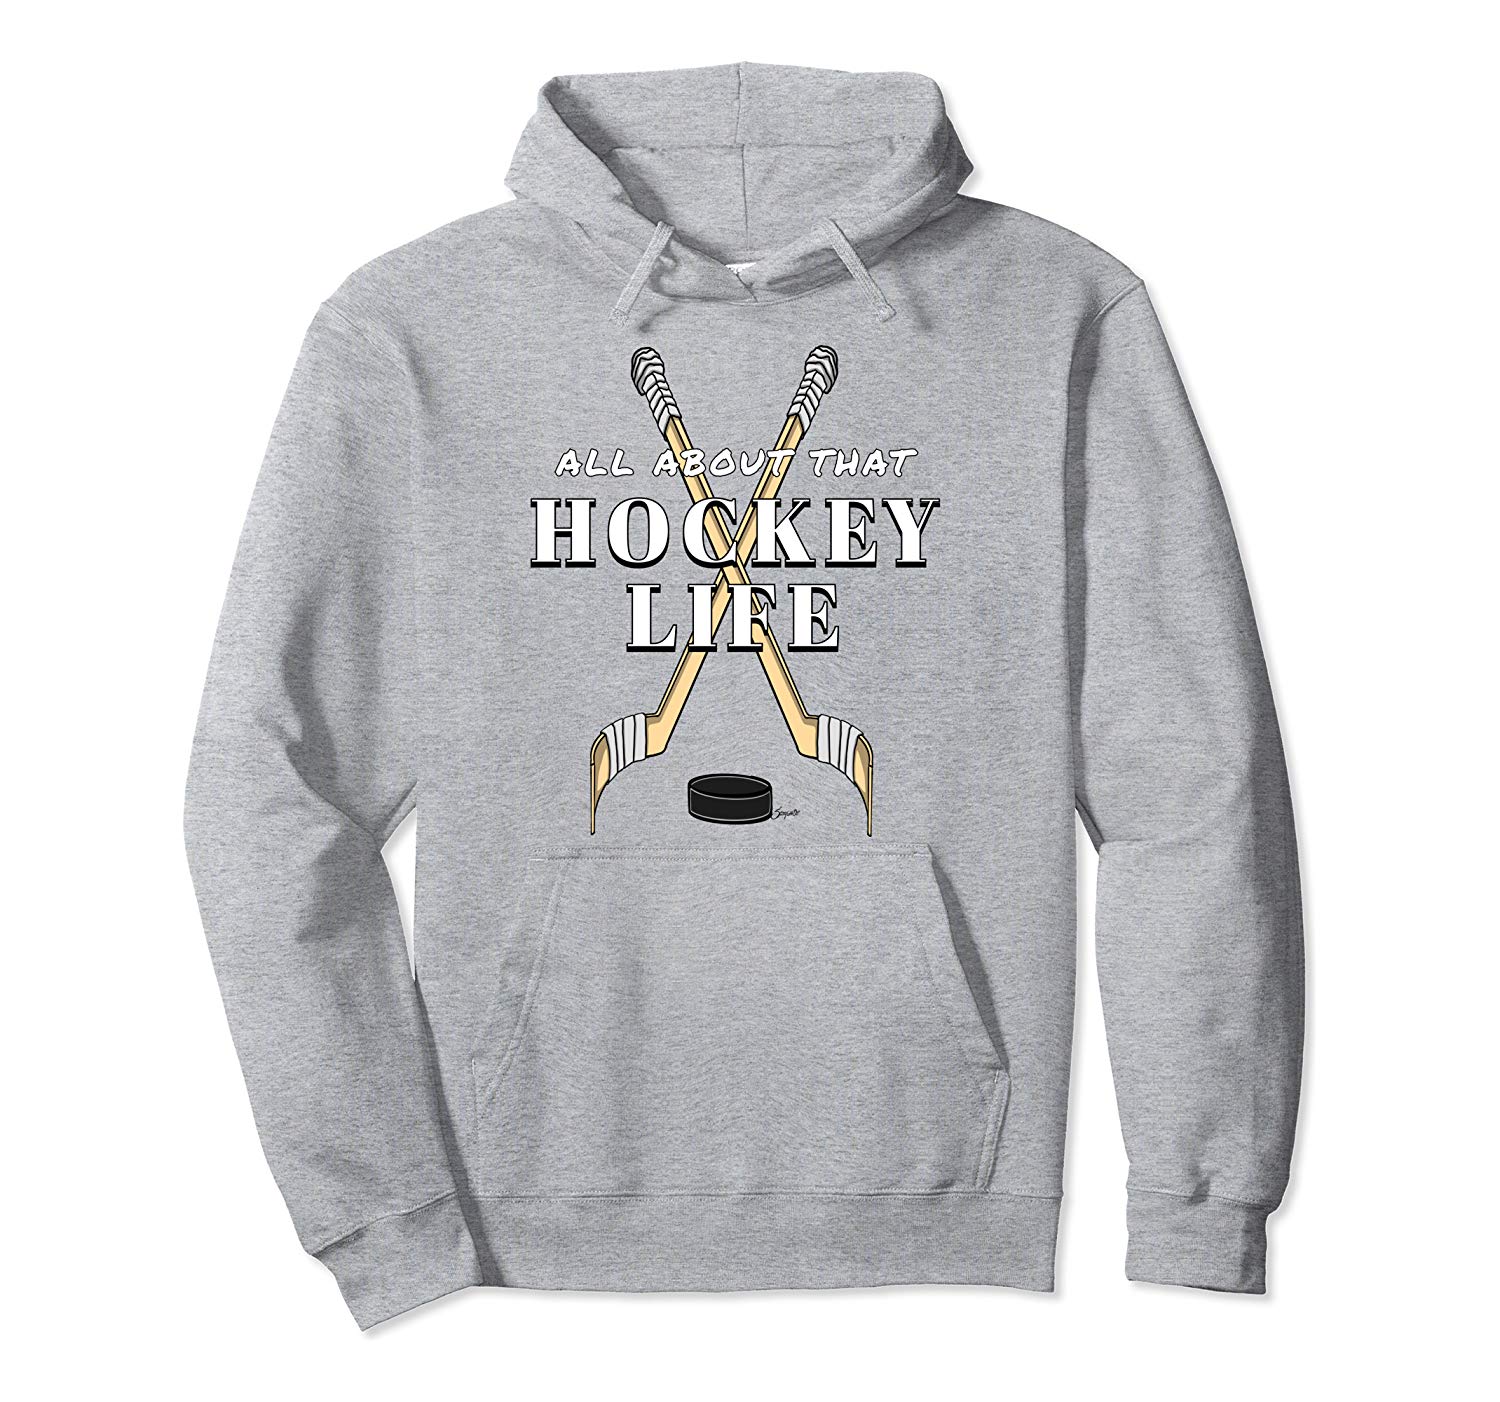 Ice Hockey Players ALL ABOUT THAT HOCKEY LIFE Hoodie